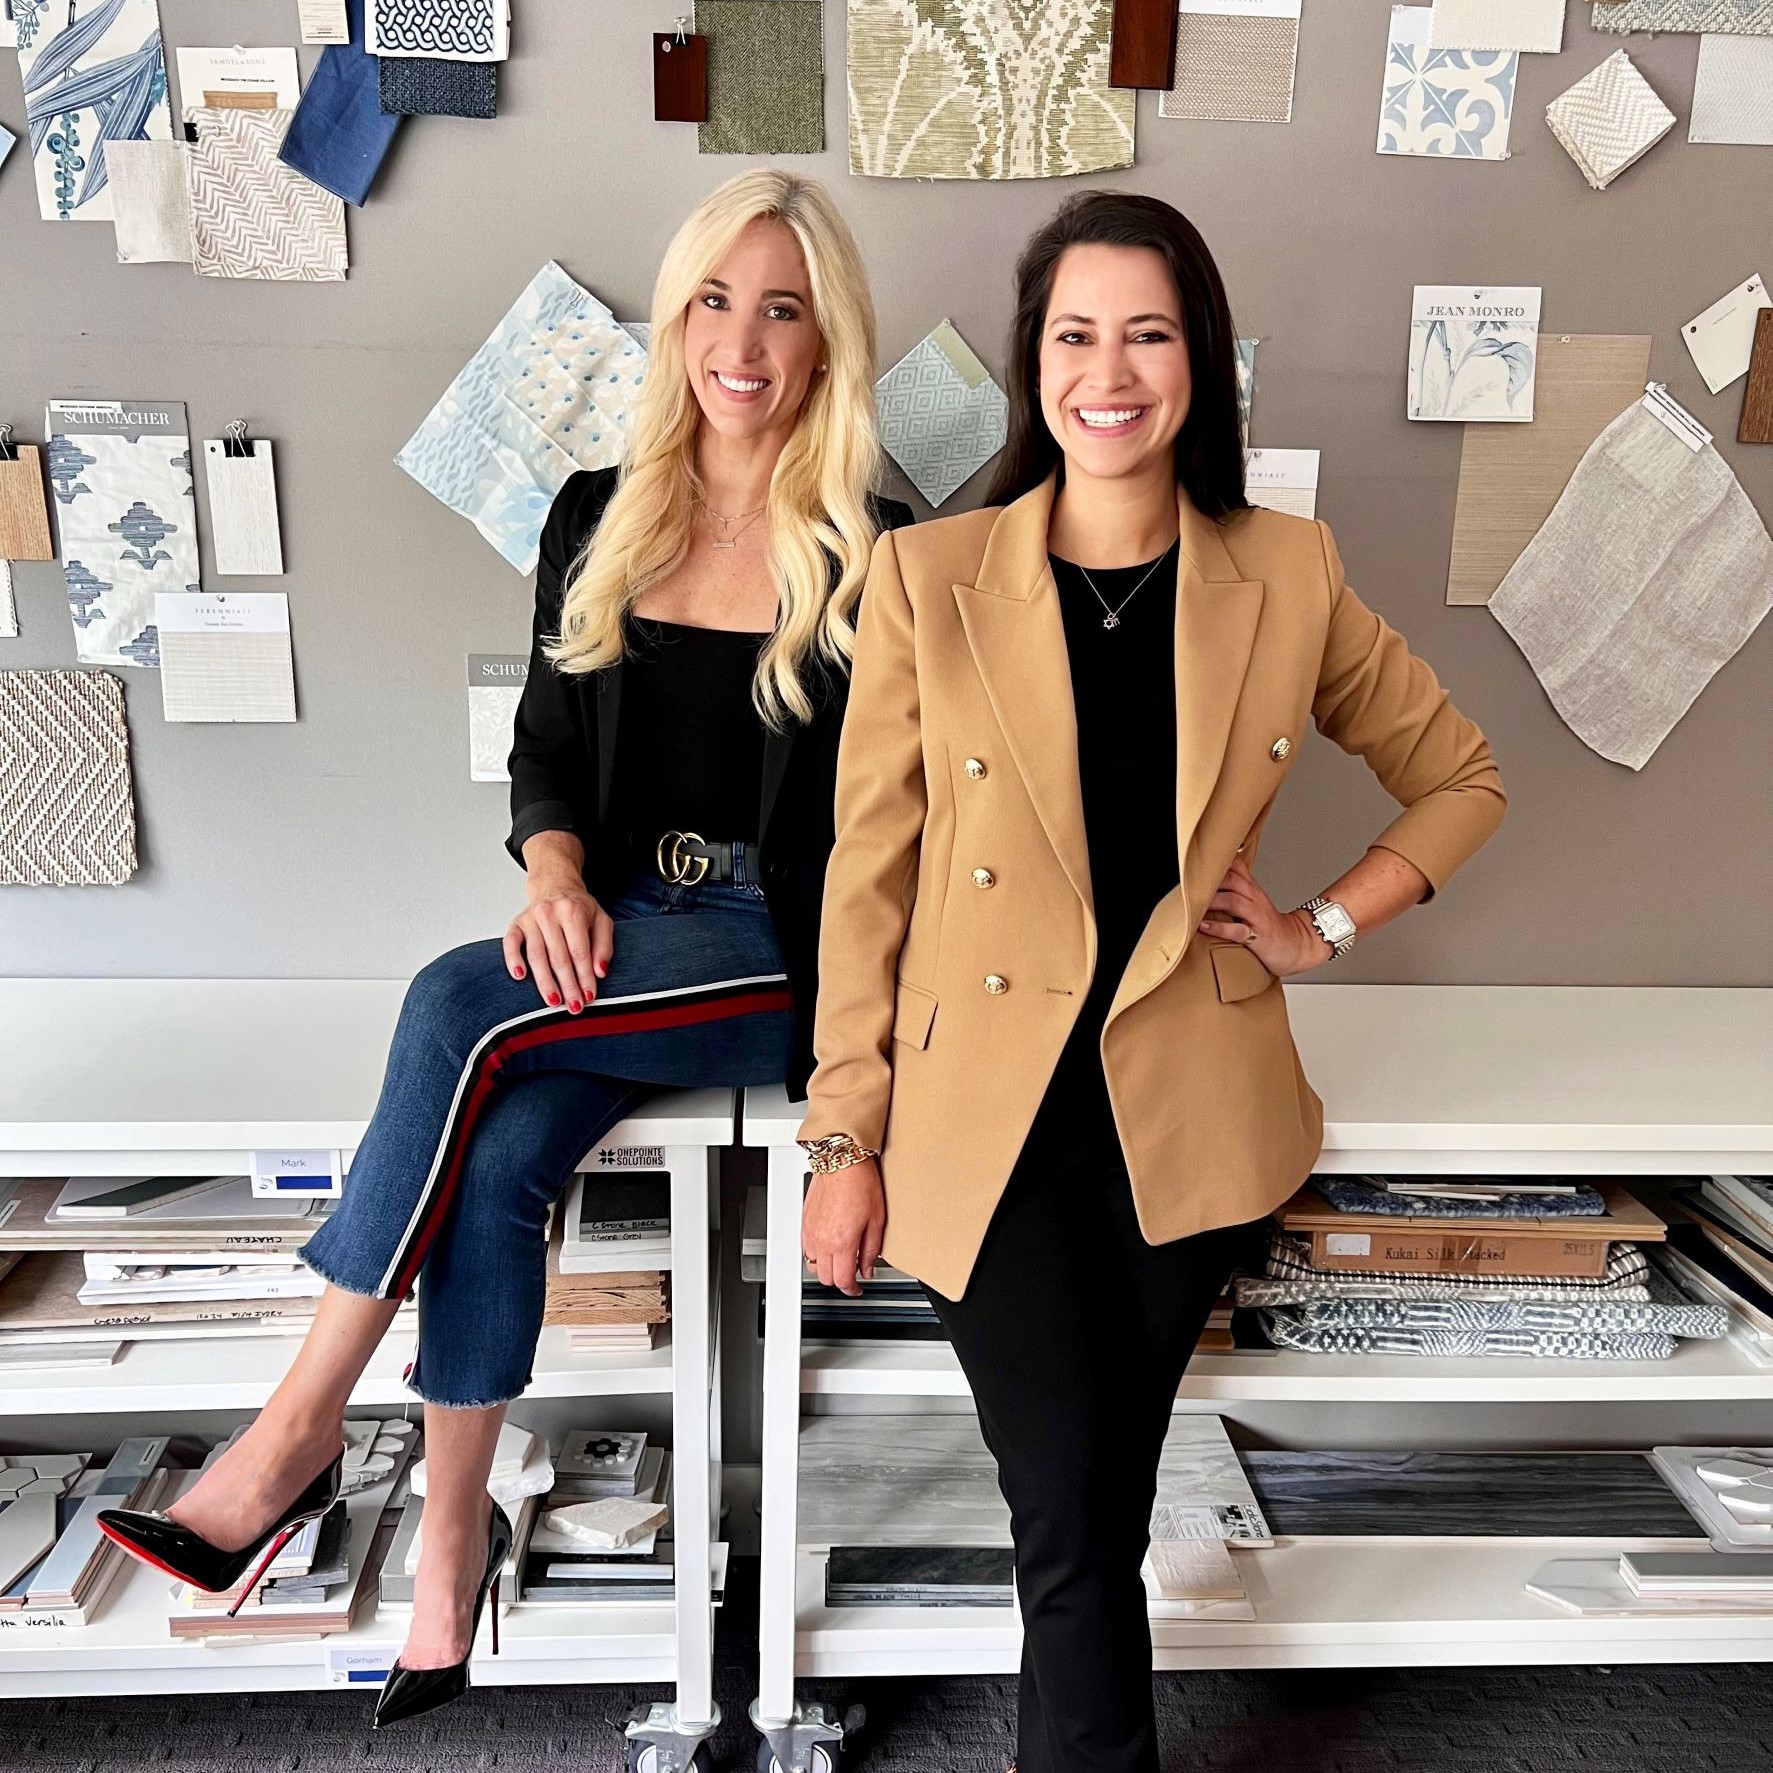 Q&A with Purple Cherry Architects’ Lead Interior Designers